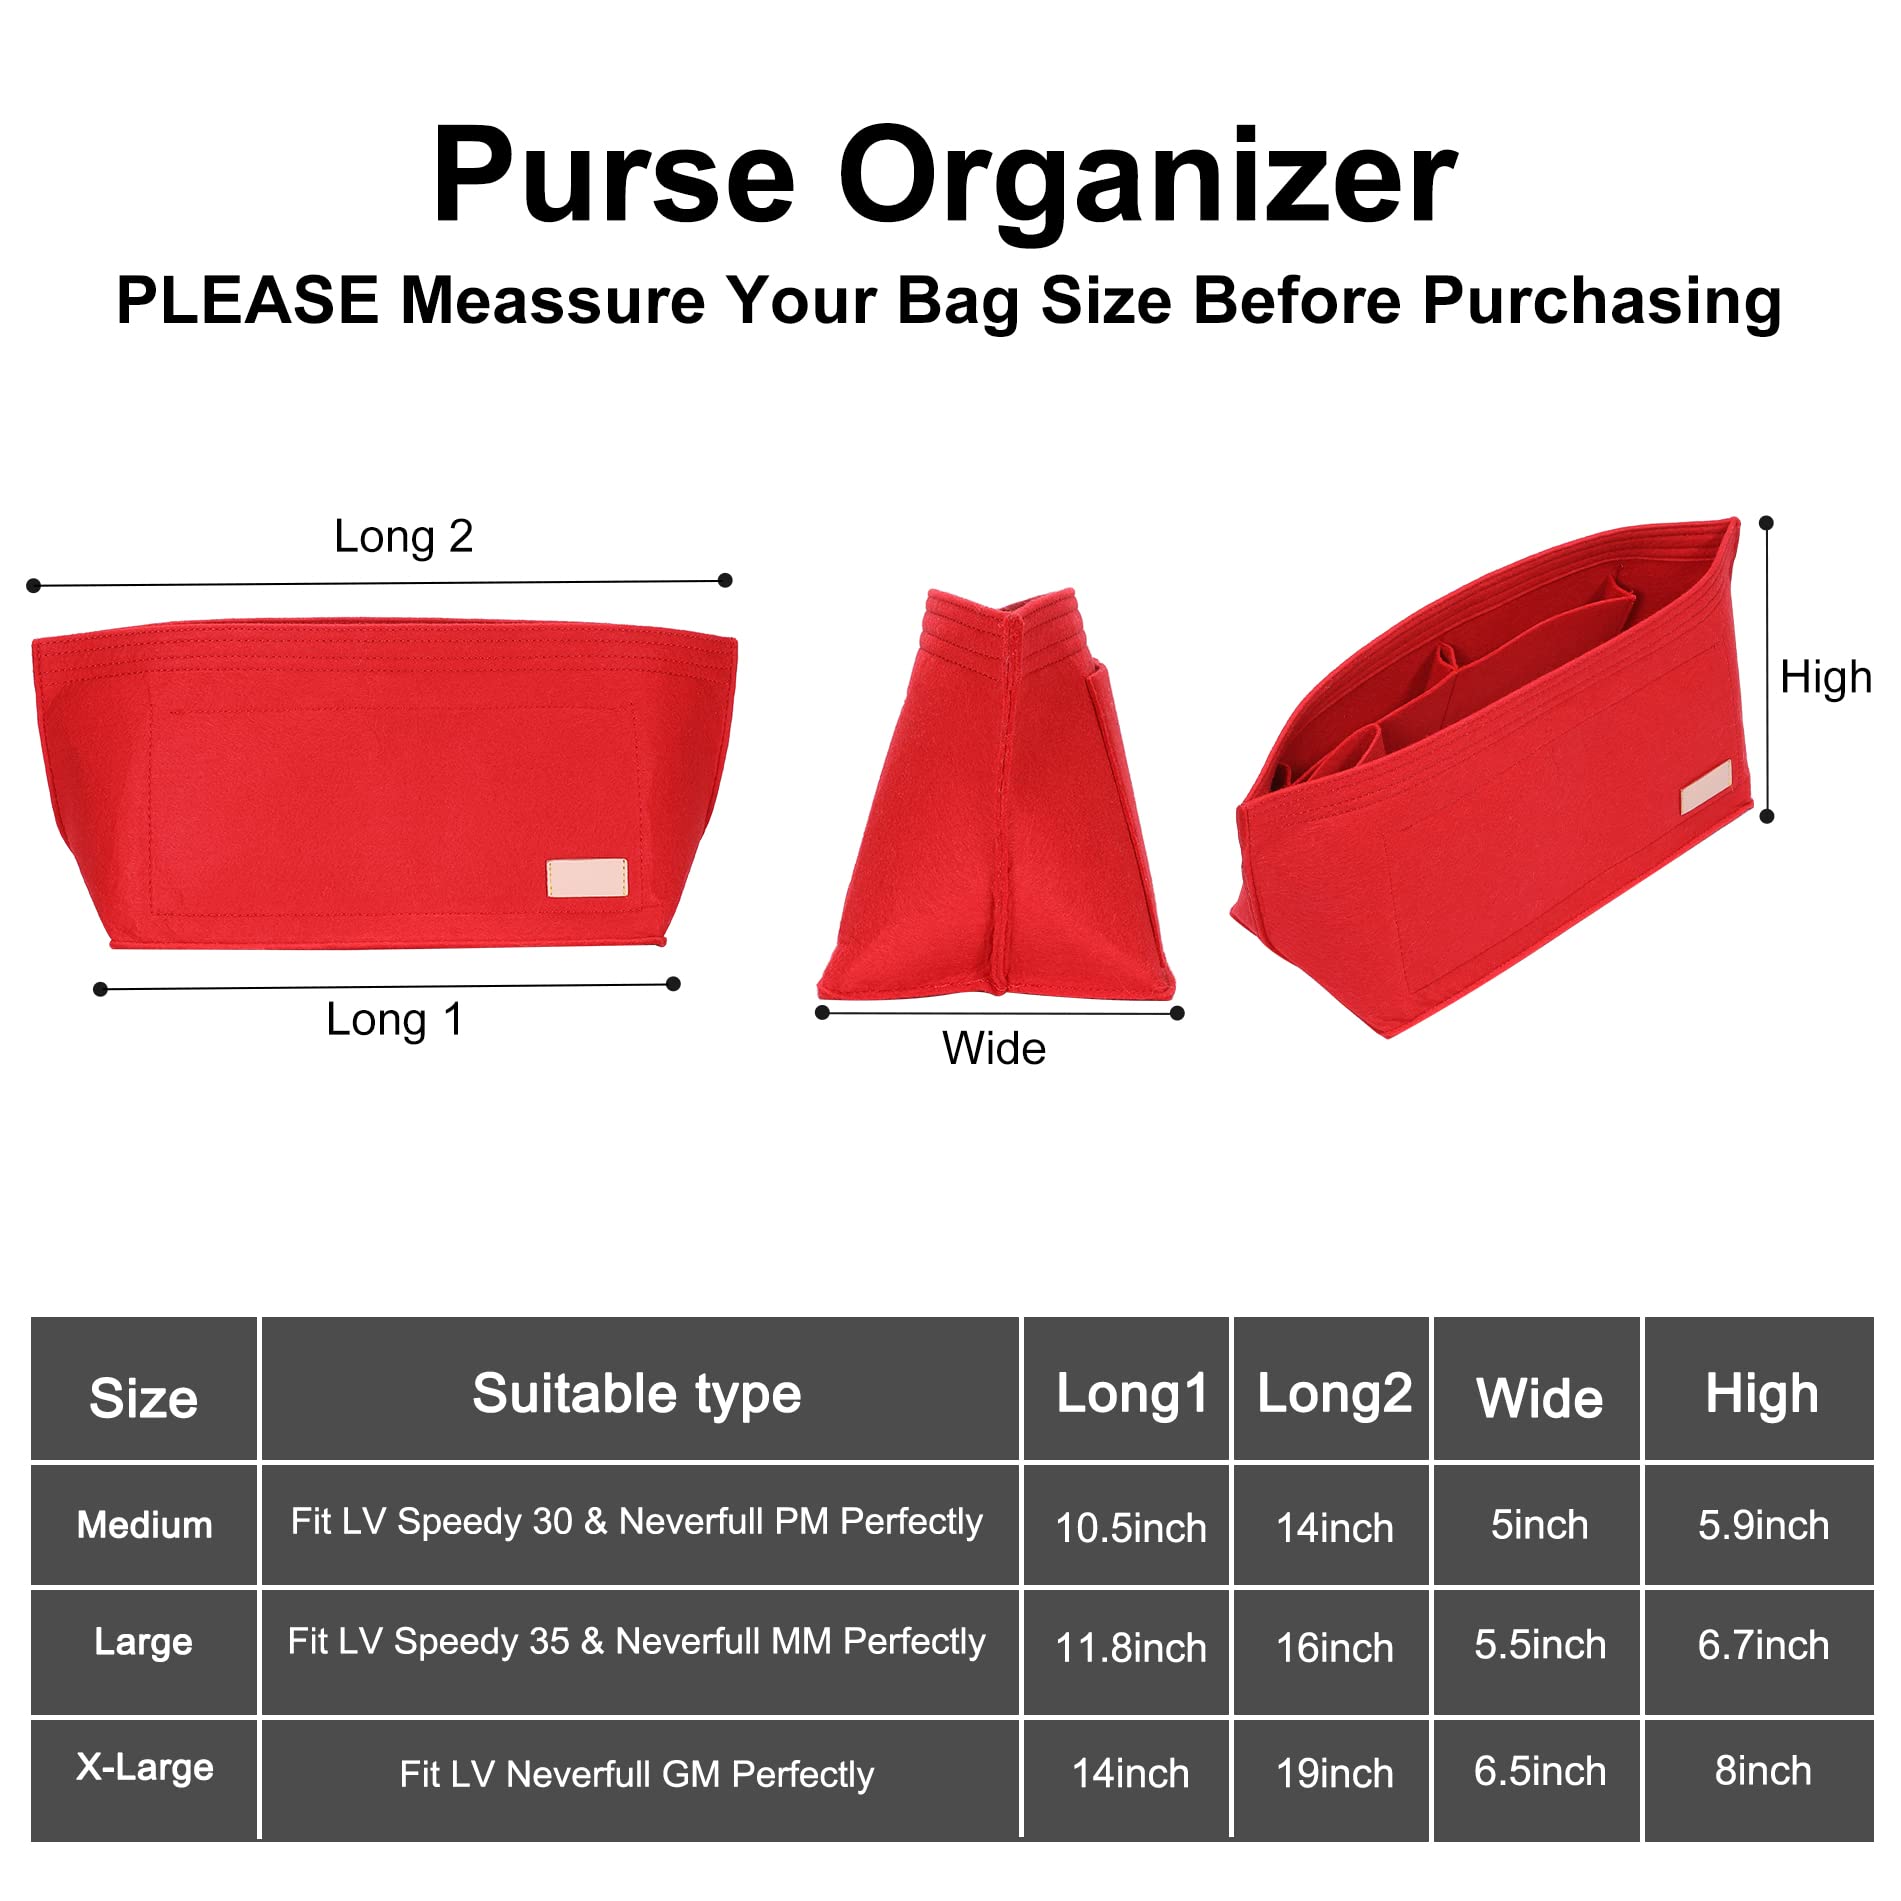 Doxo Purse Organizer Insert for Handbags & Base Shaper Combination,Tote Bag Organizer Insert with 6 Sizes,Compatible with LV Speedy & Neverfull on